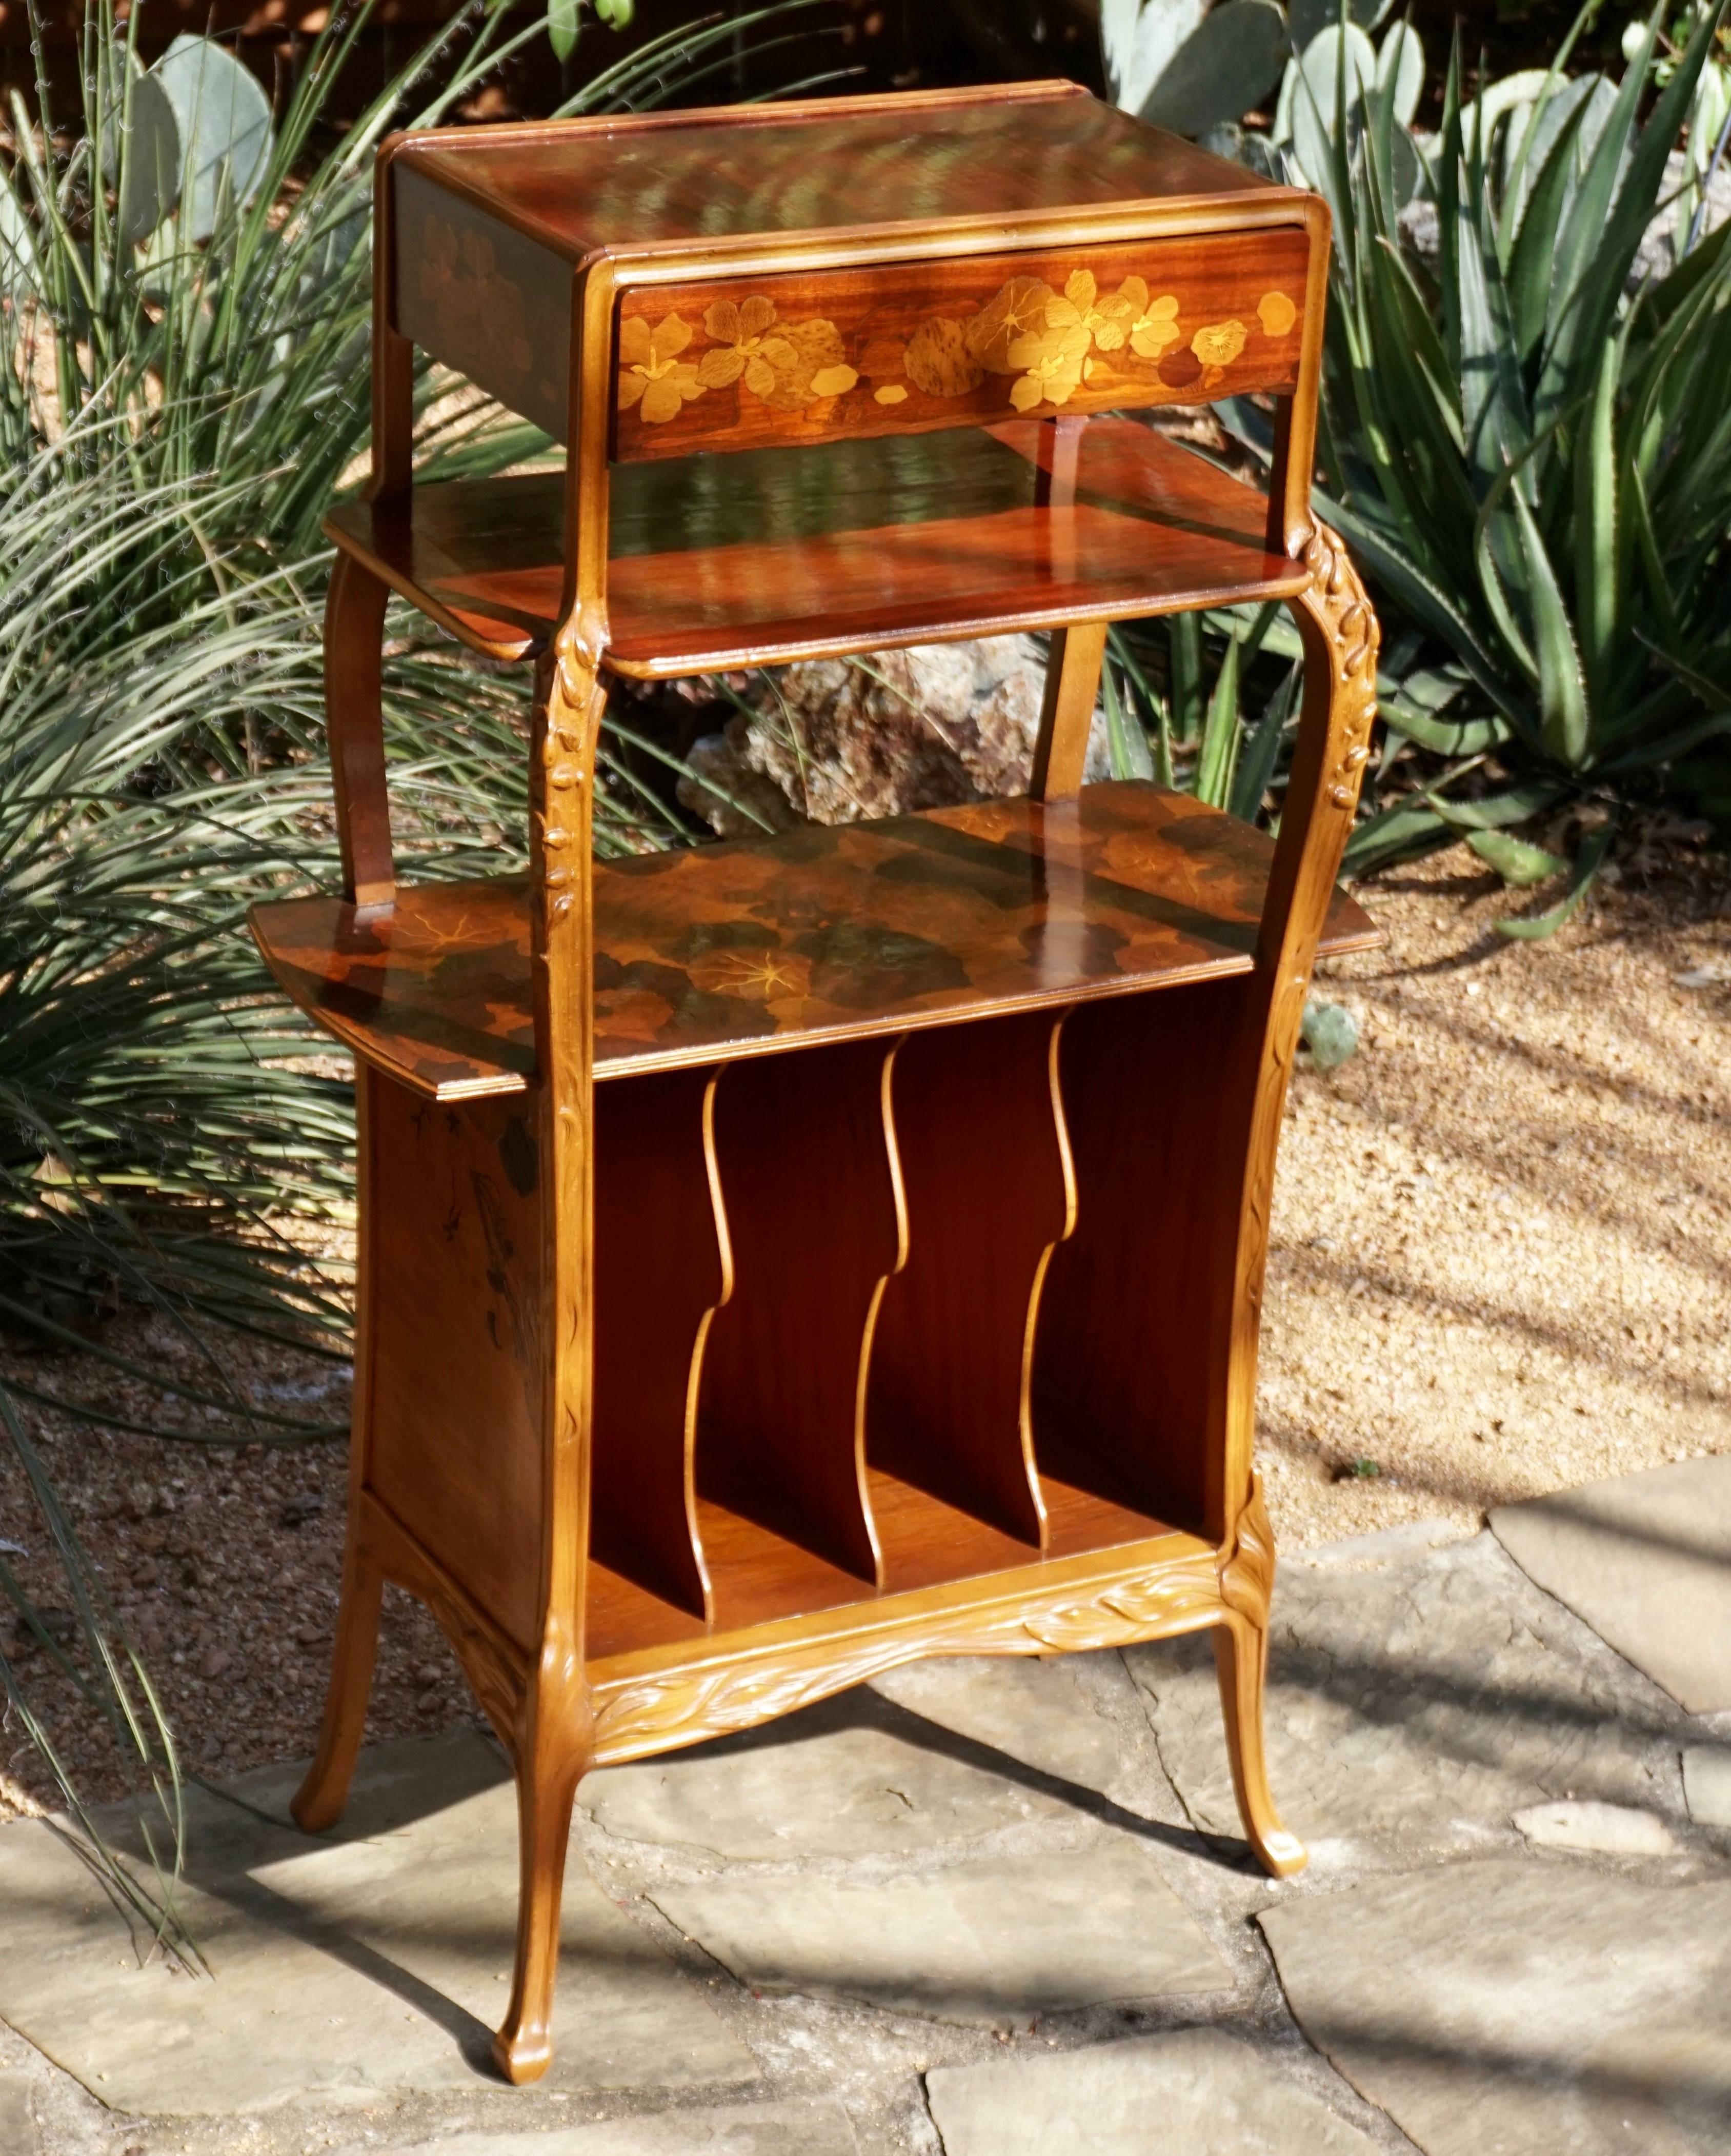 Louis Majorelle Art Nouveau etagere-music cabinet. With marquetry on sides, center and front depicting foliage, vines, flowers and lily pads. One drawer on top, three etageres and decided compartments below. Could be used as a bookcase.

Signed in